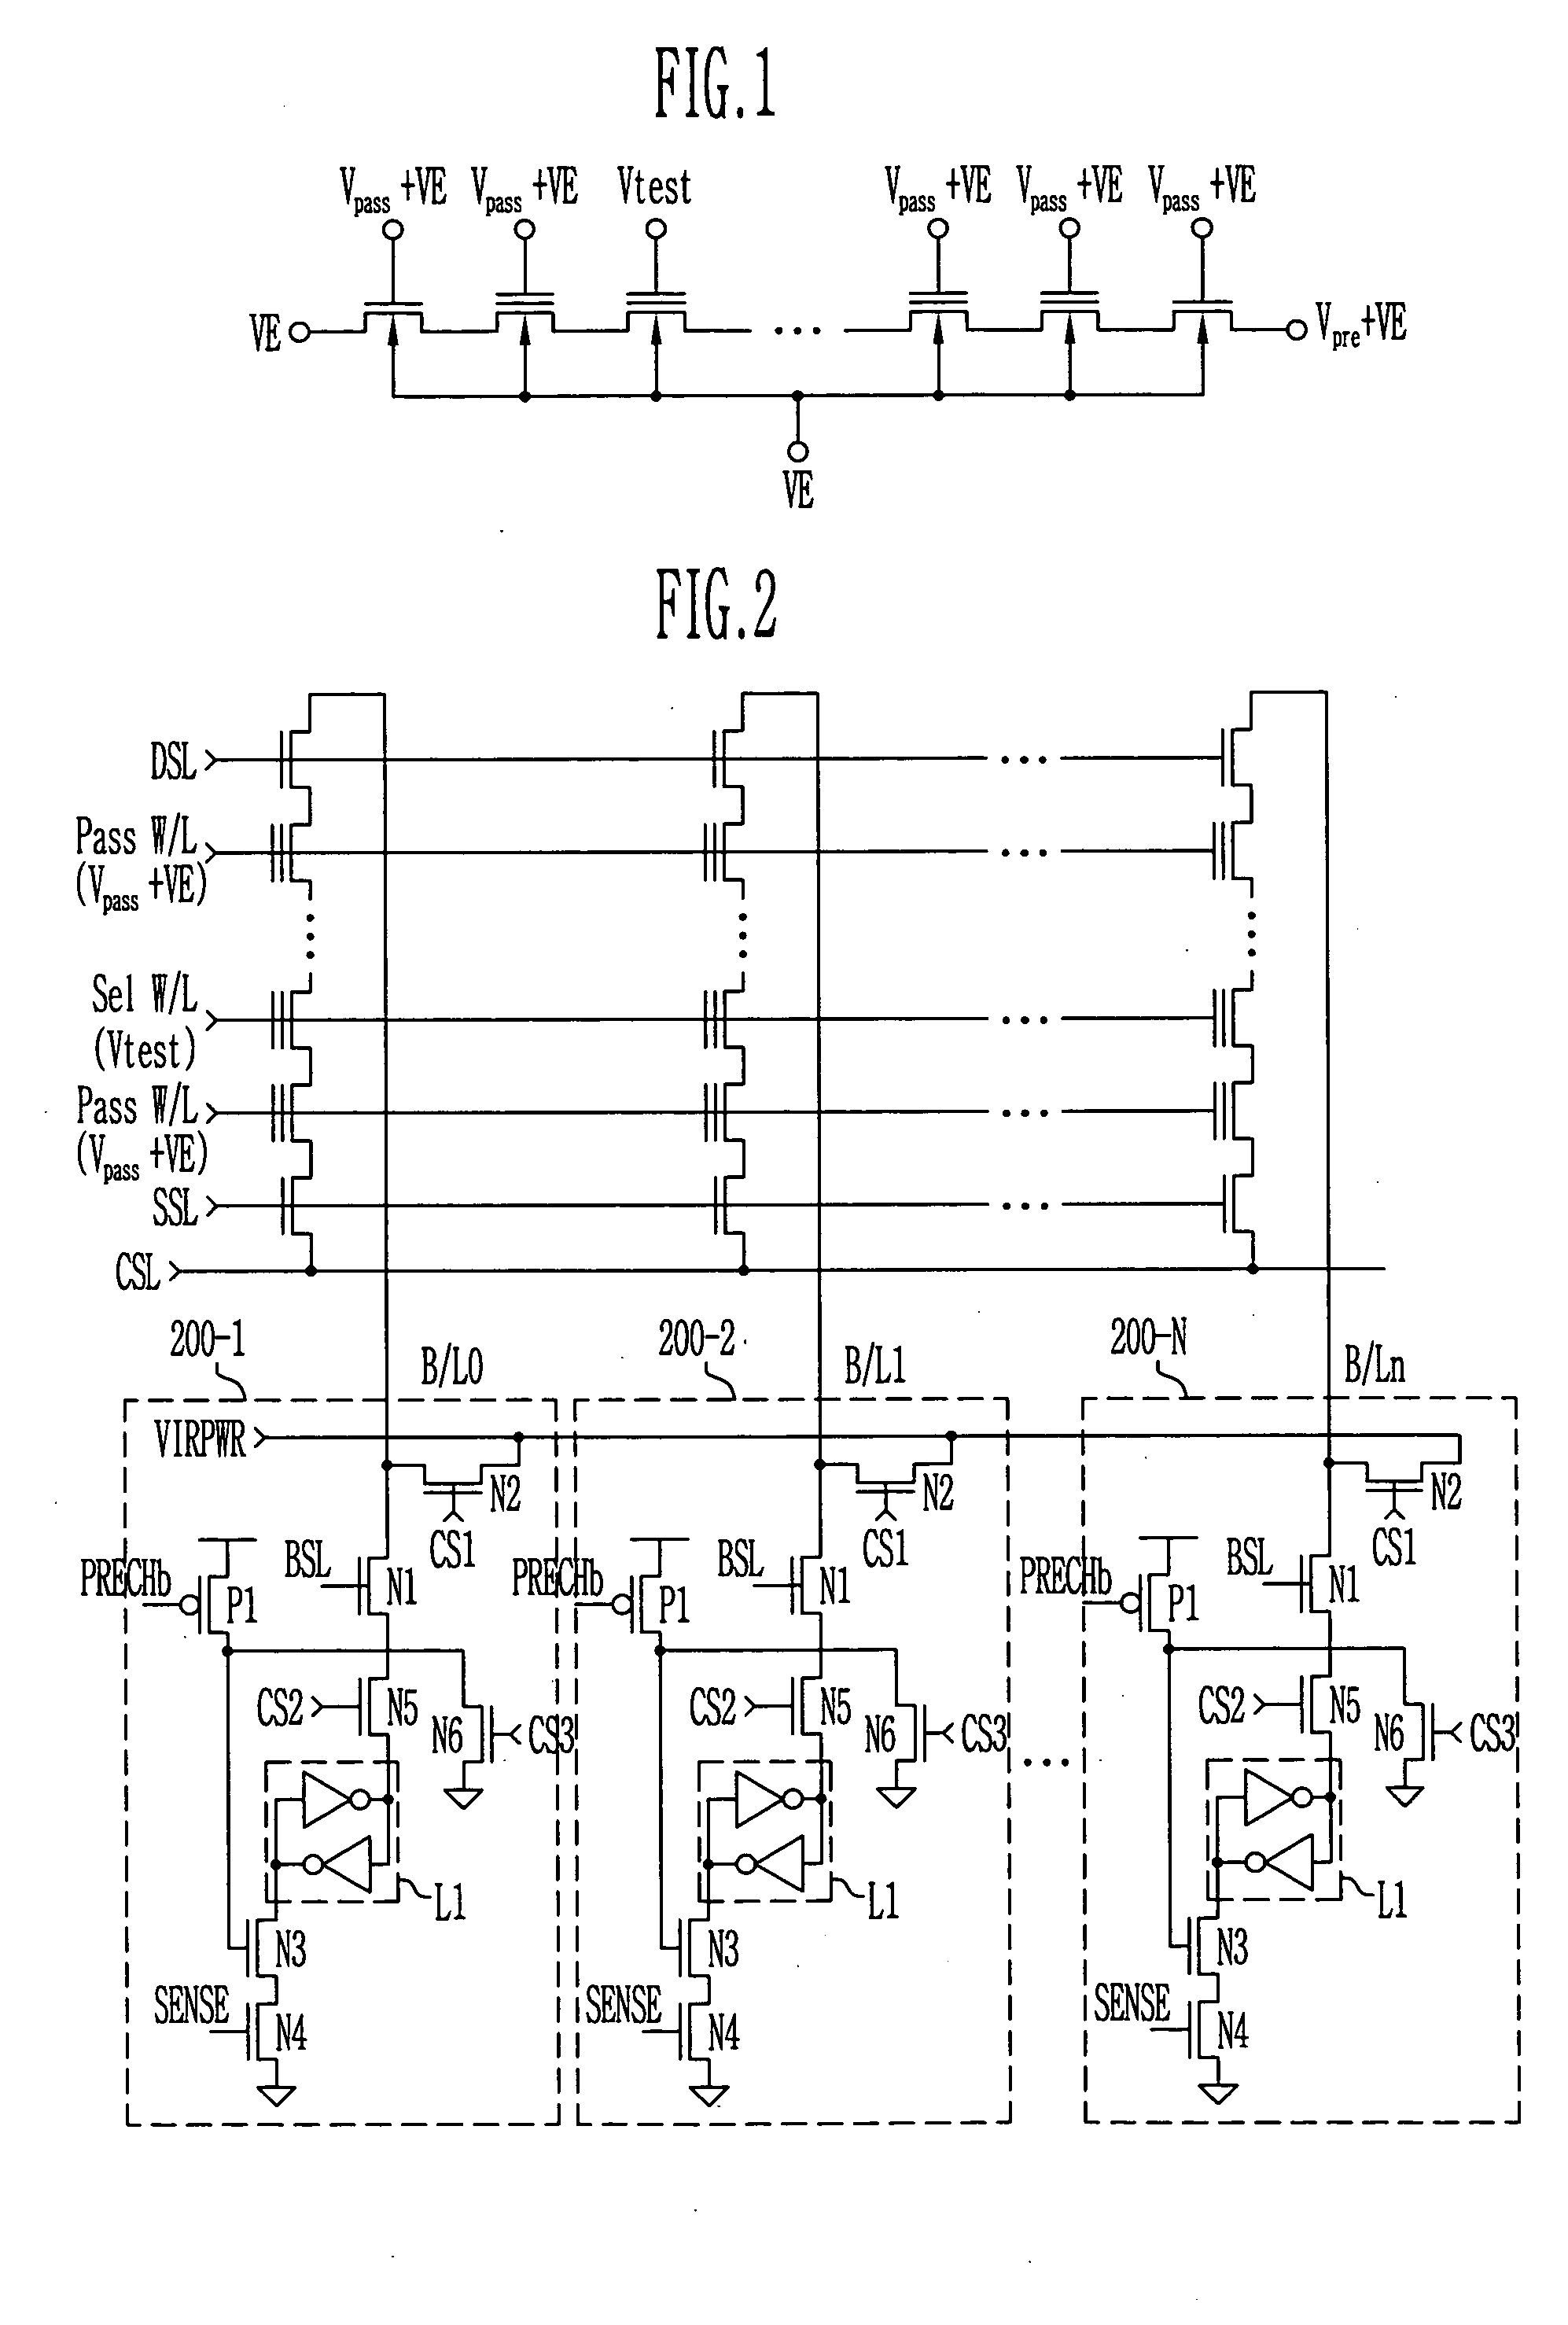 Method of measuring threshold voltage for a NAND flash memory device